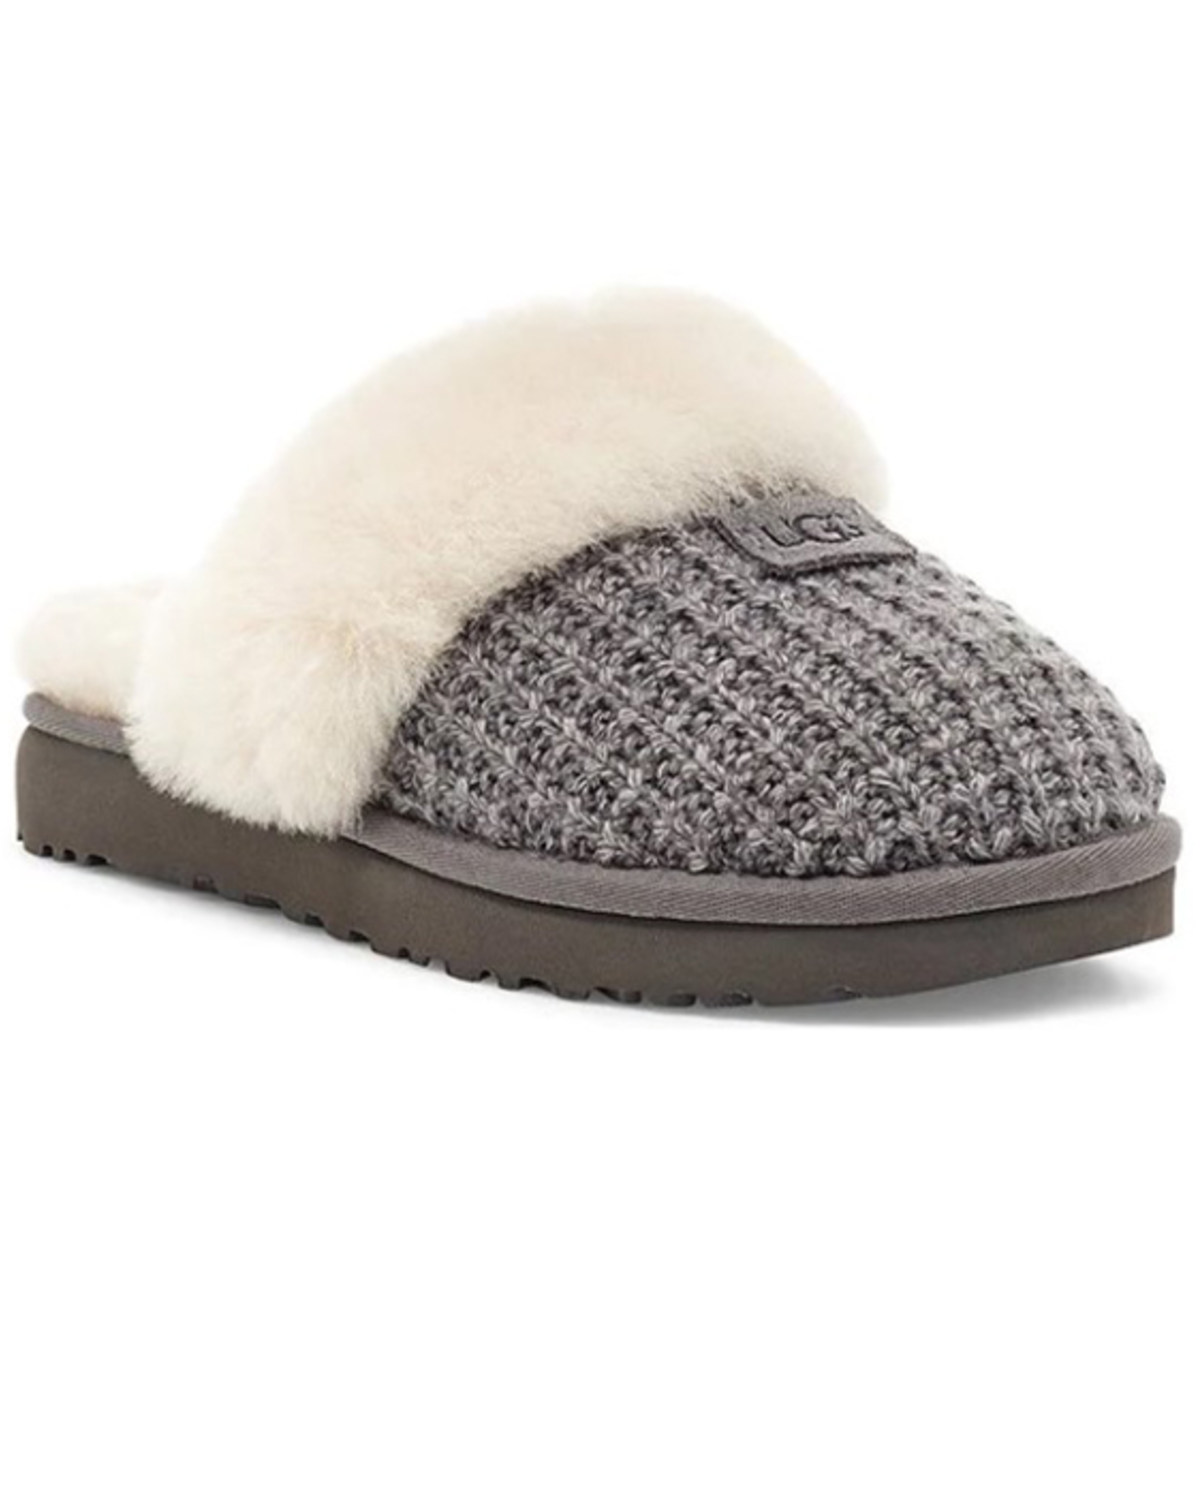 UGG Women's Charcoal Cozy Slippers 